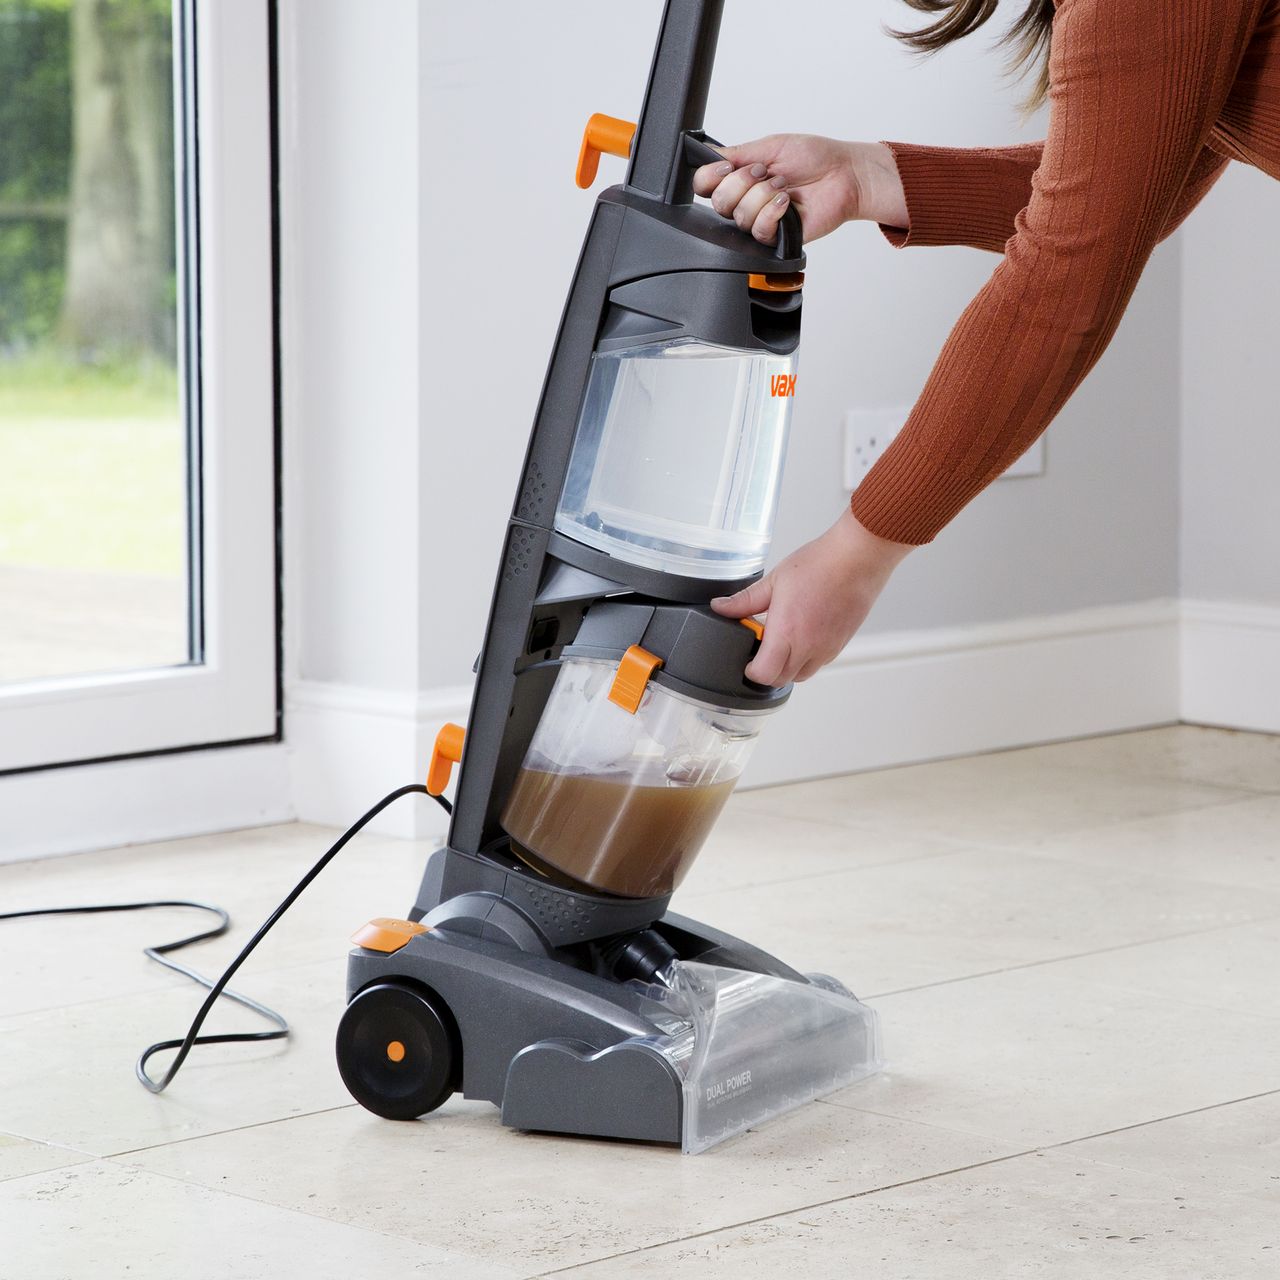 2.7 L Vax Dual Power Carpet Cleaner Carpet Solution Bundle Graphite and Orange and Ultra 